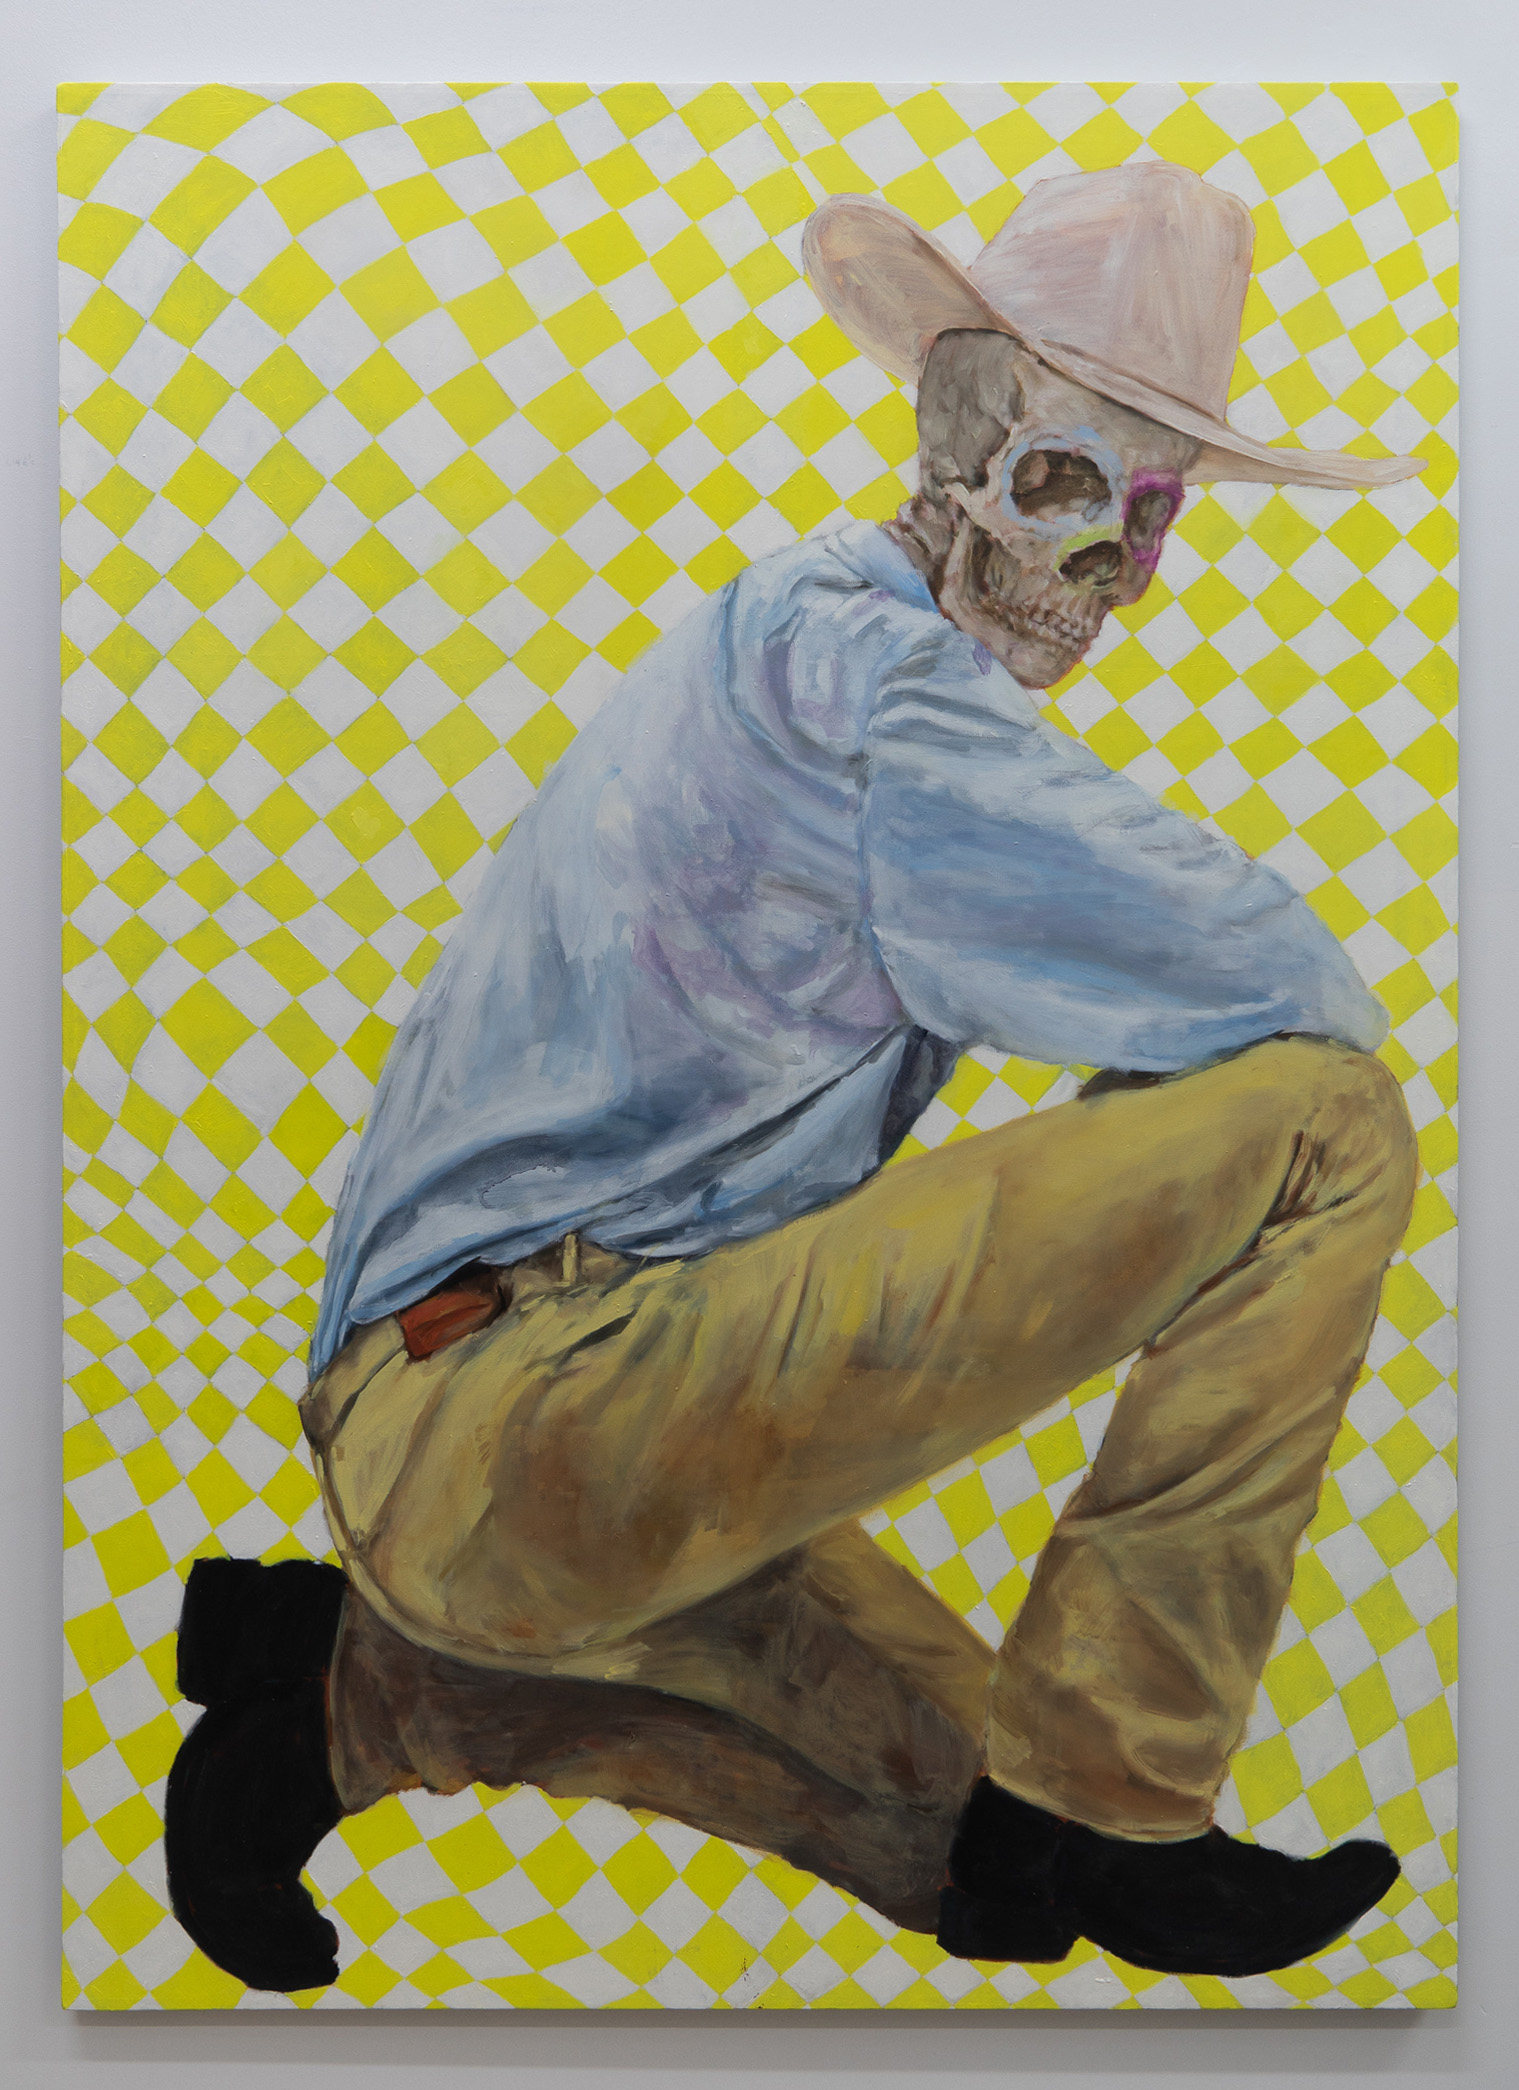  Graham Hamilton,  New American , 2015-2018, oil and acrylic on cotton shirting, 57 x 40 1/4 inches 